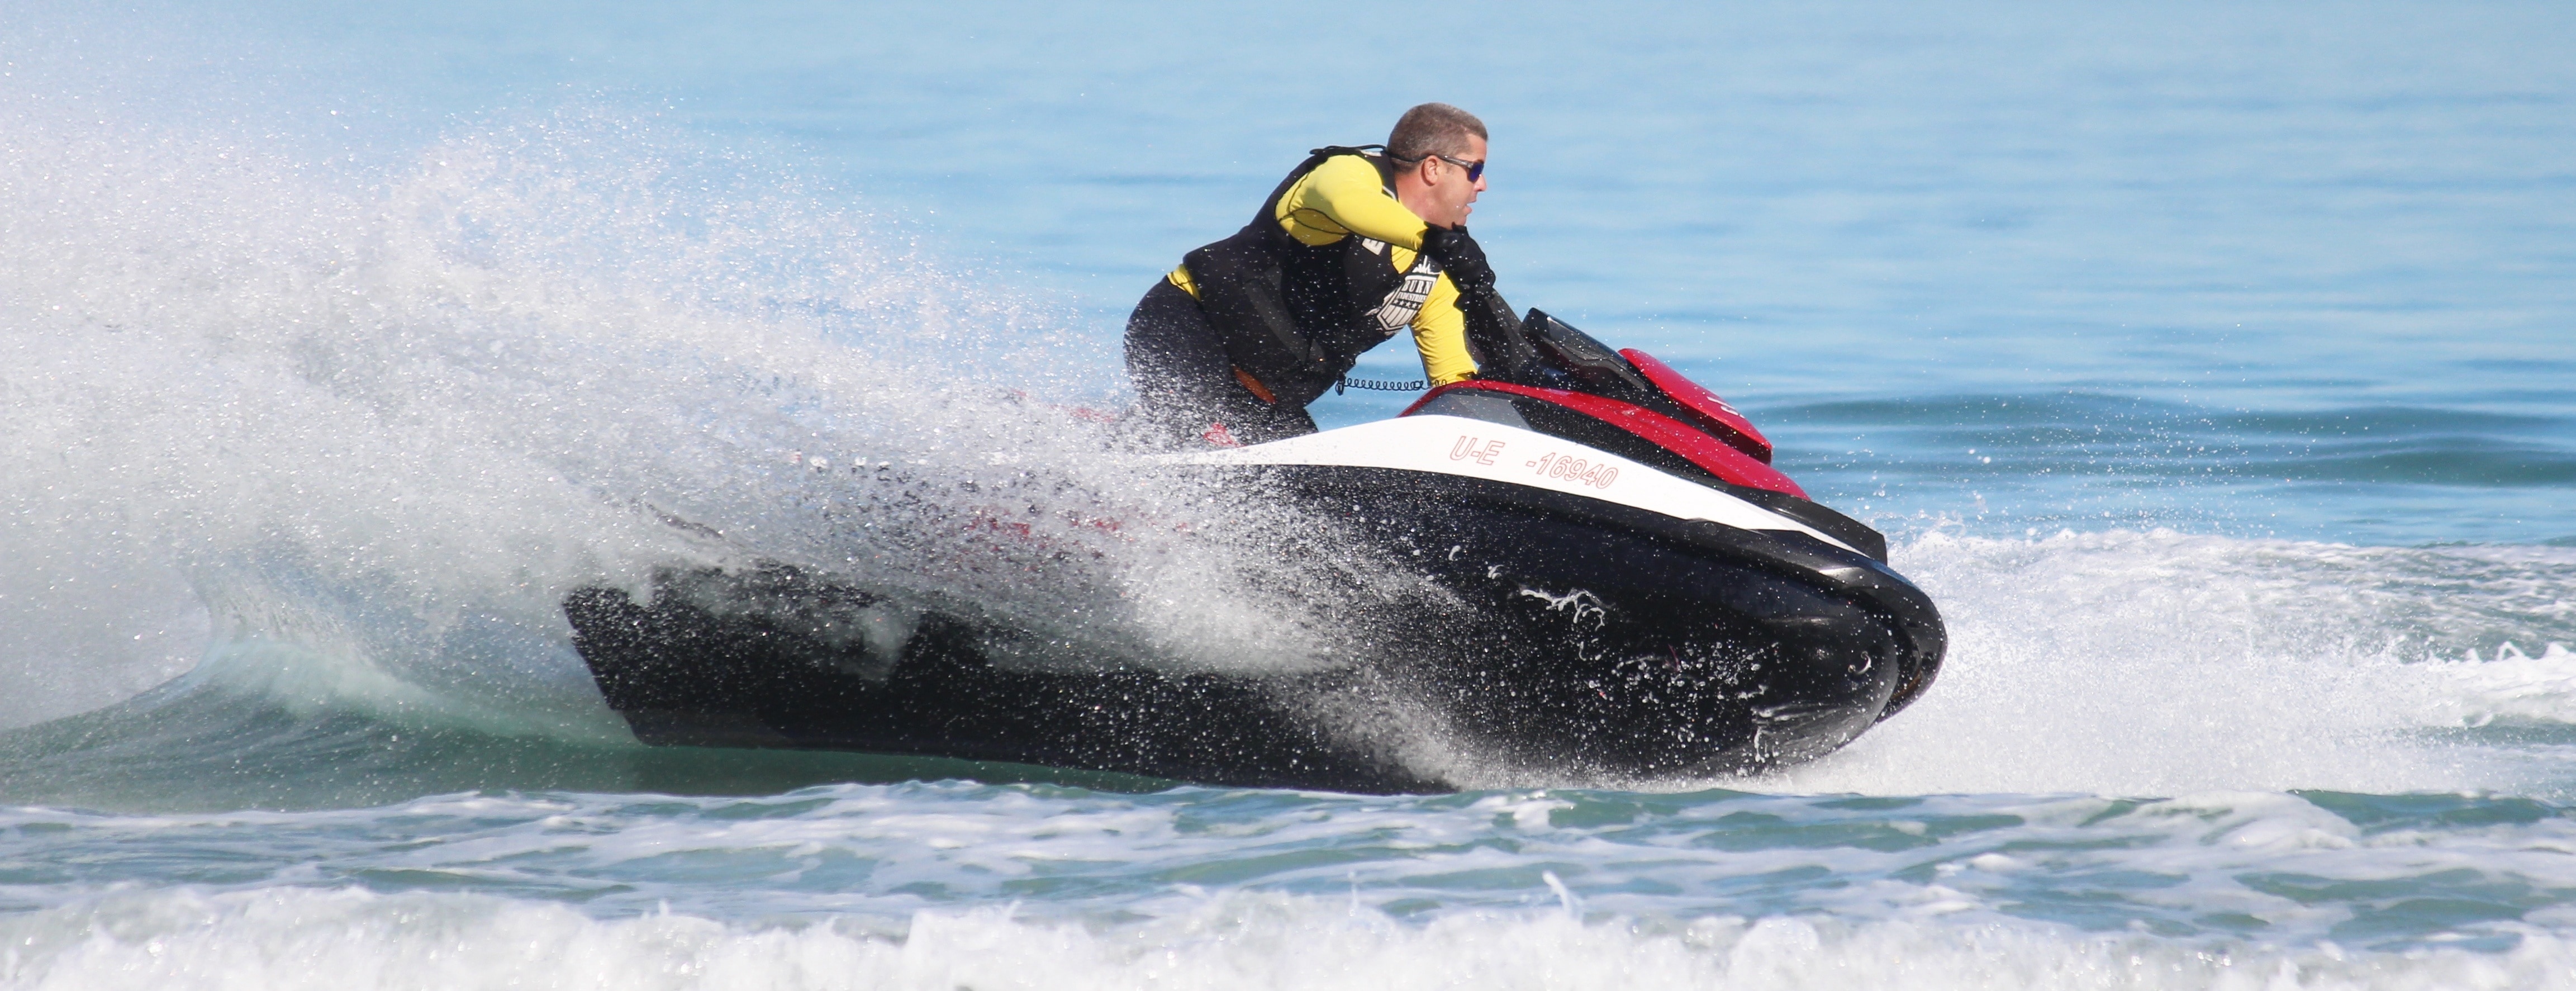 black and white personal watercraft